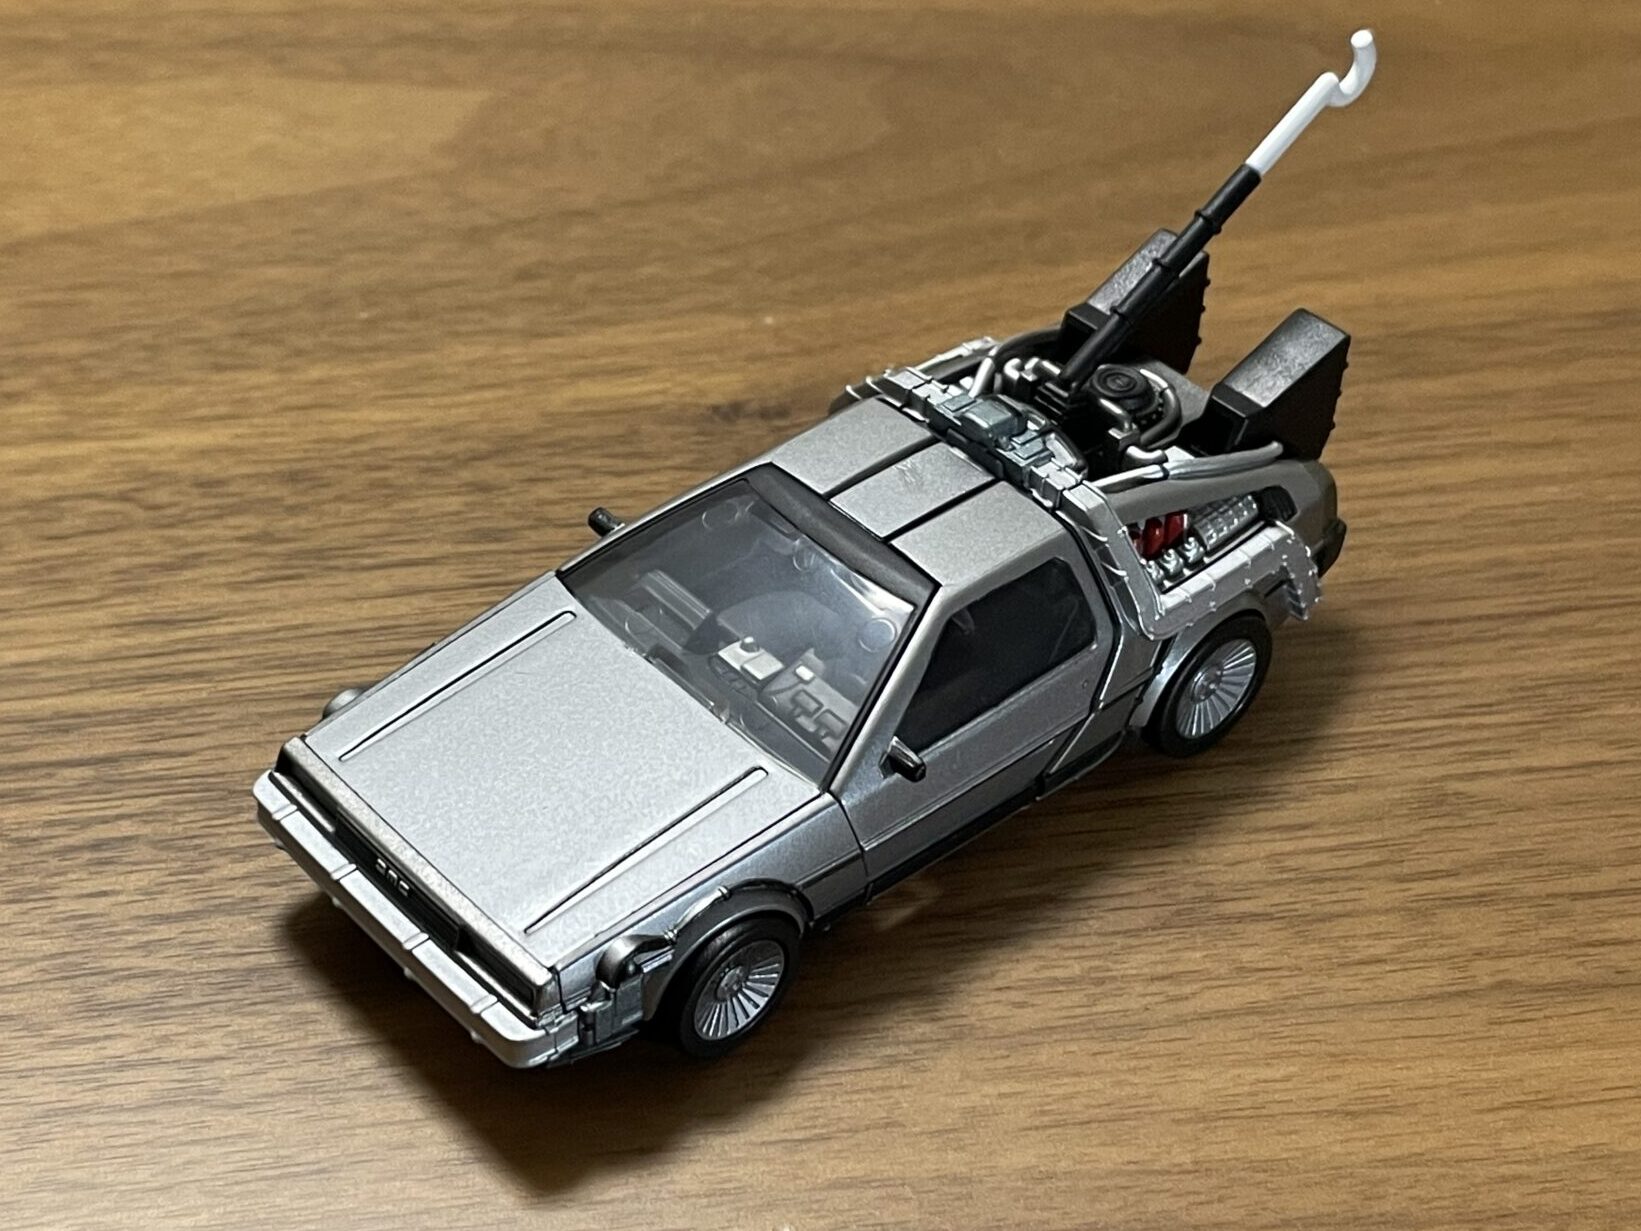 BACK TO THE FUTURE EXCEED MODEL -デロリアン- DX